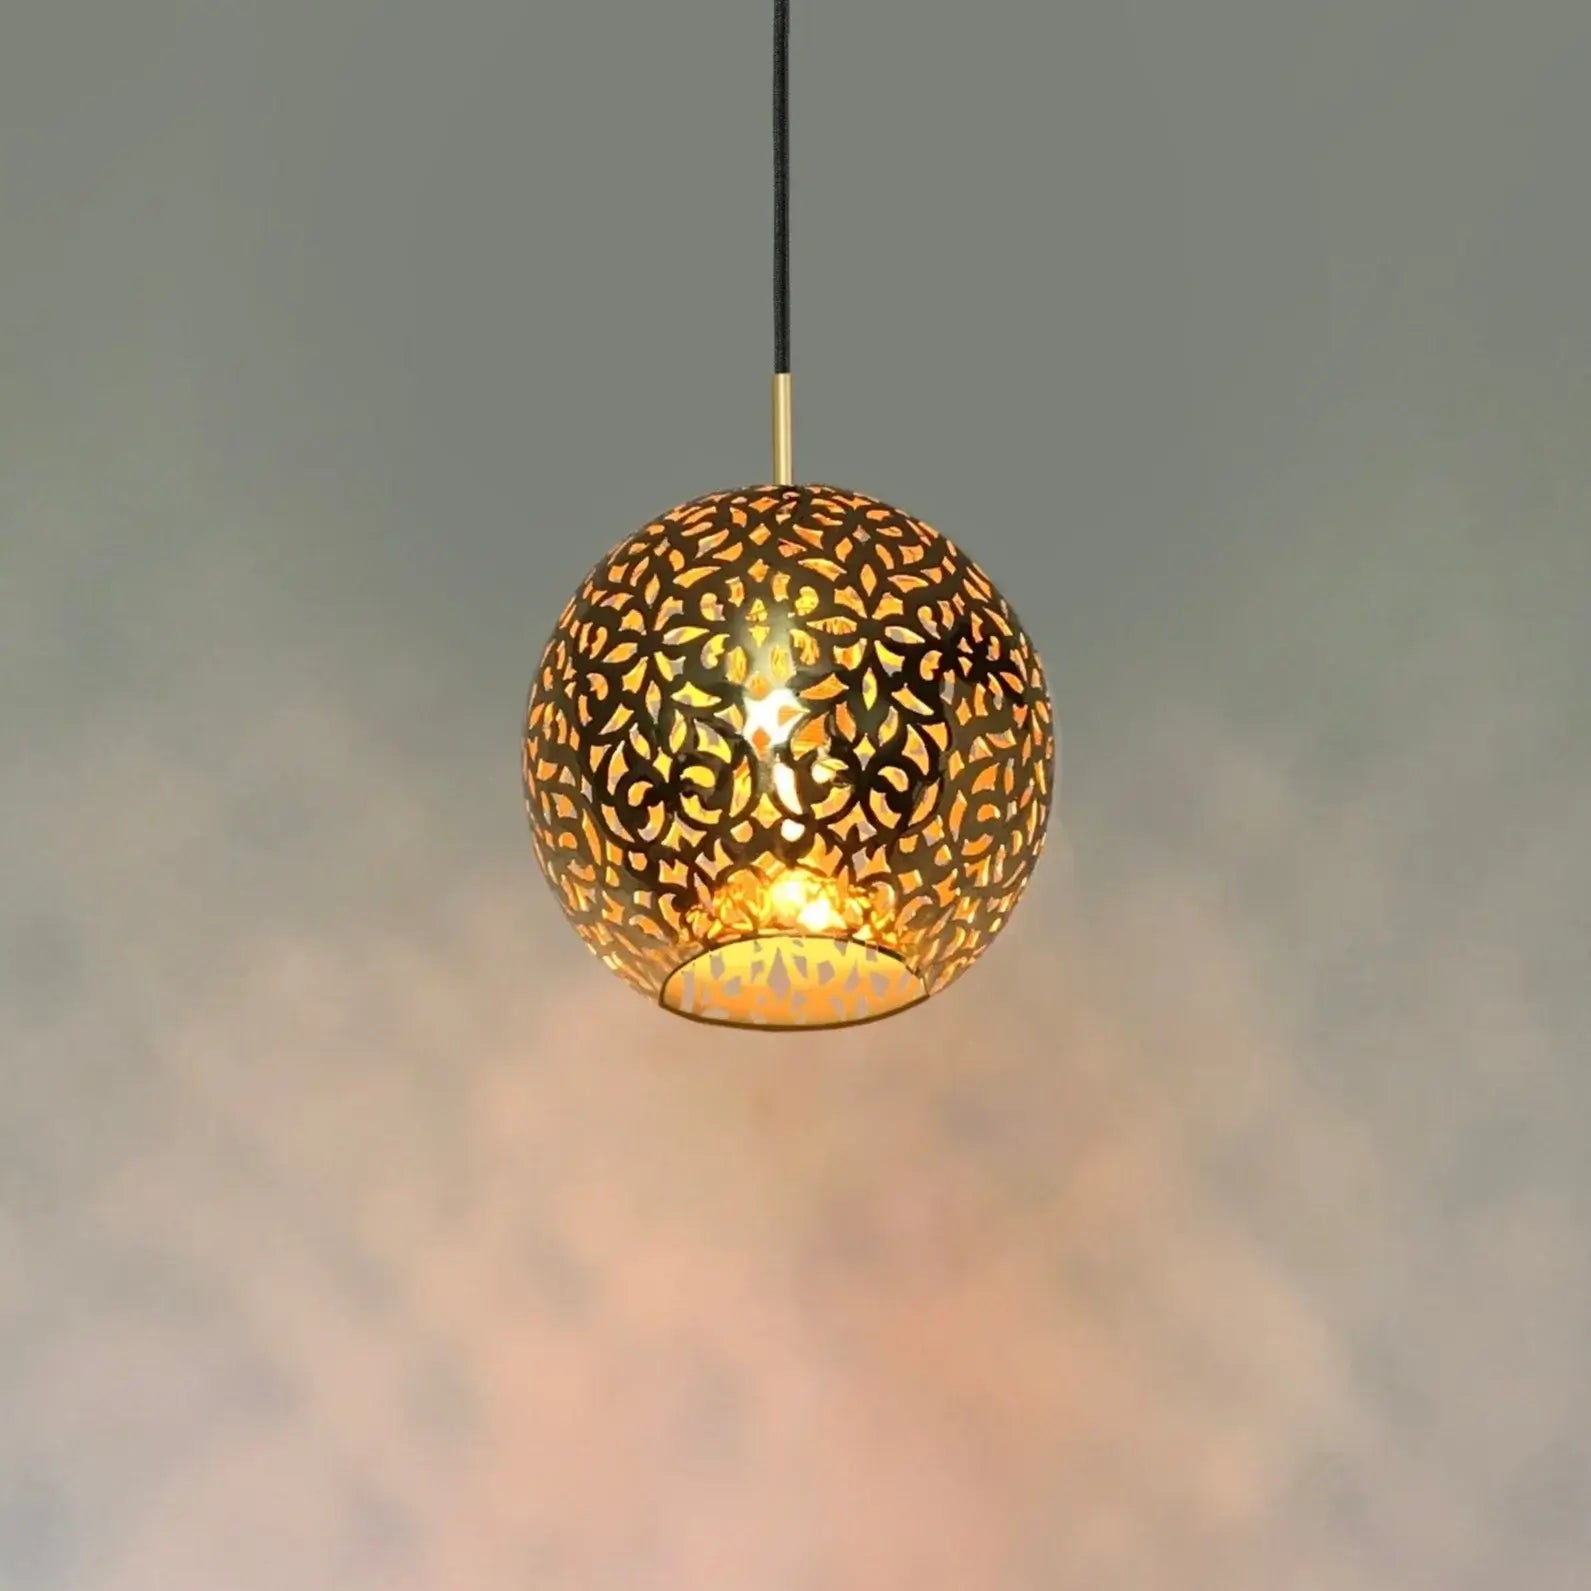 Dounia home Pendant light in Polished brass   made of Metal, Model: Riad  single